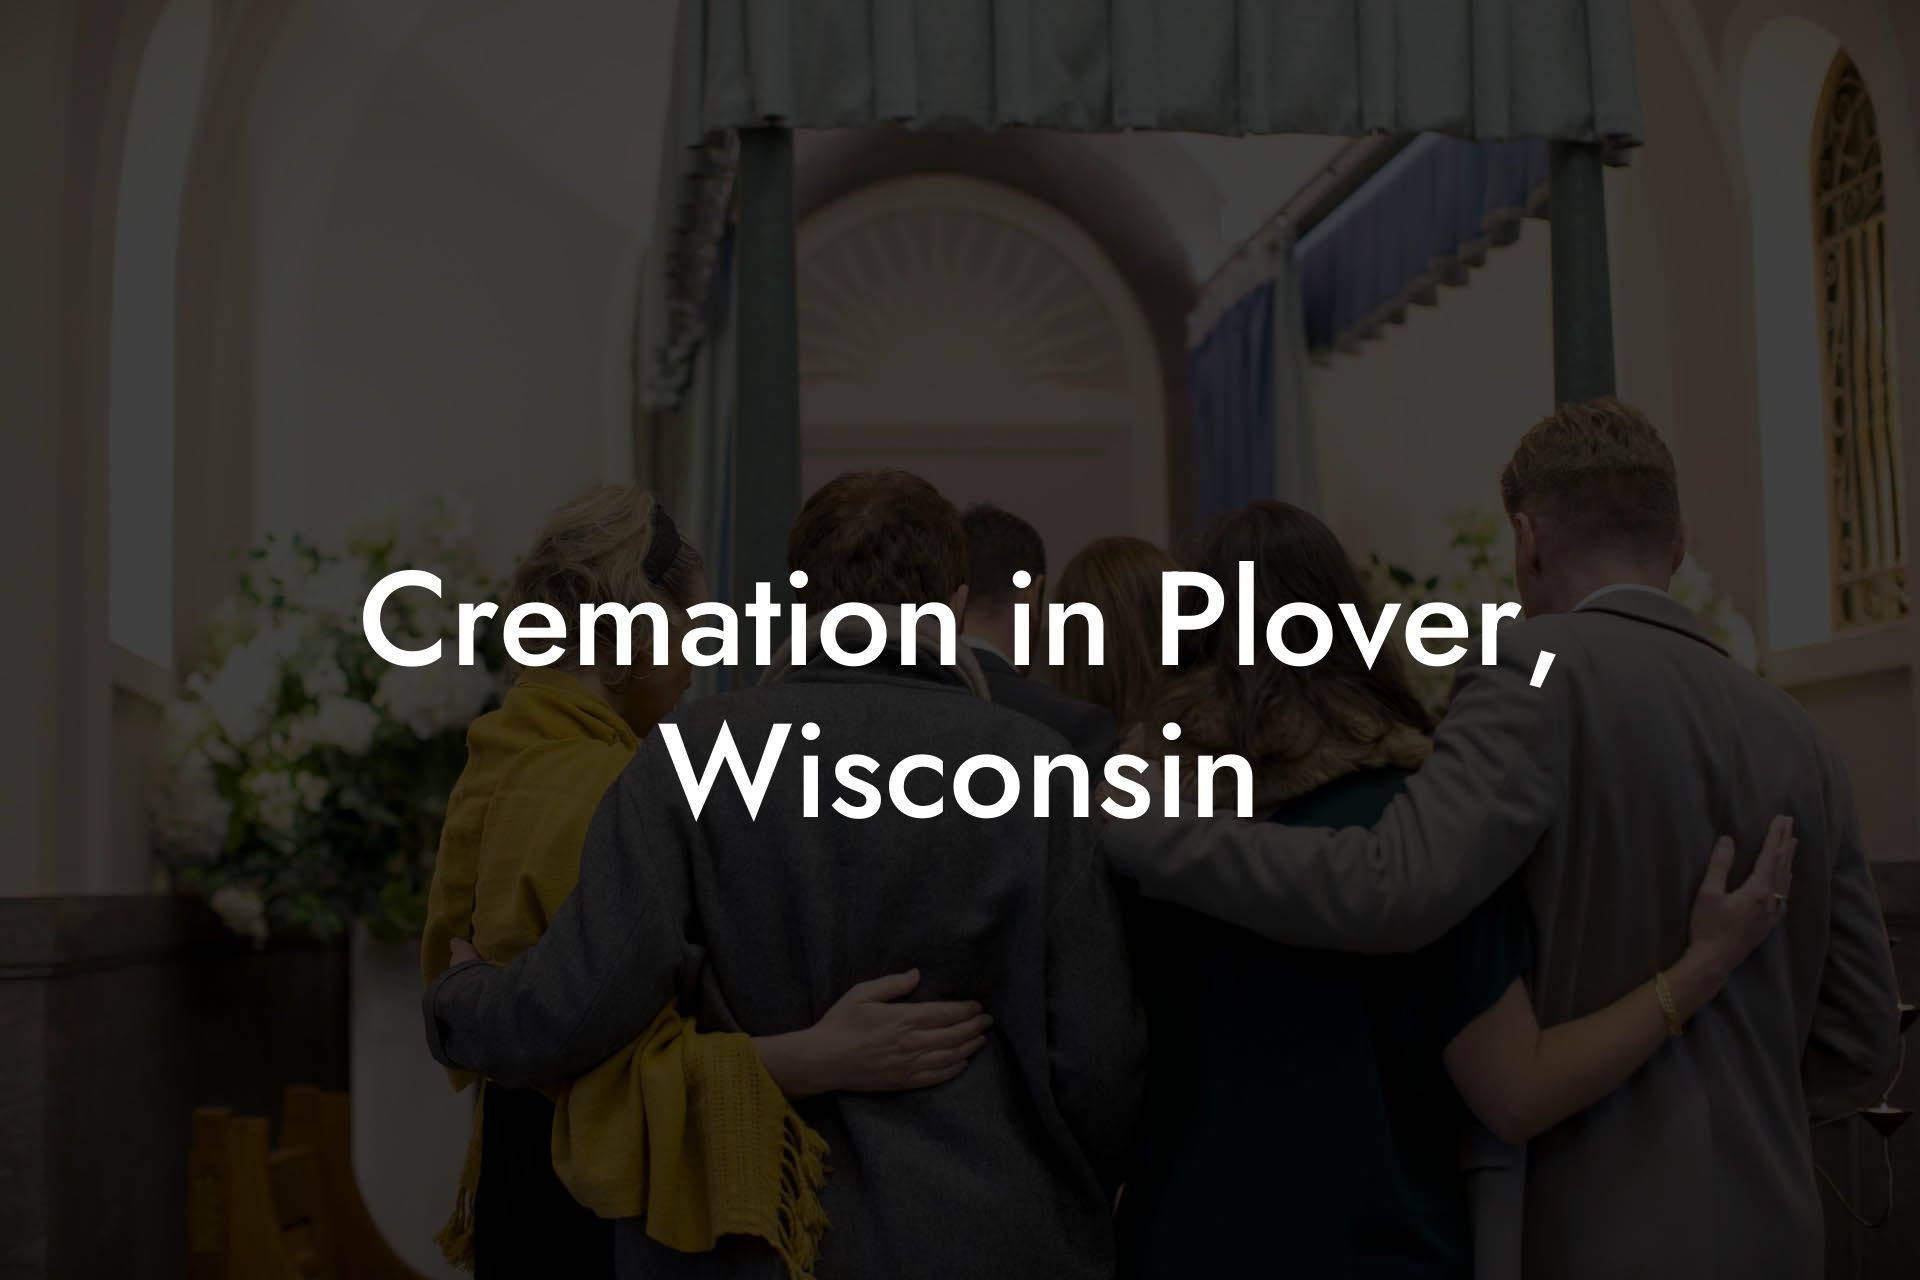 Cremation in Plover, Wisconsin